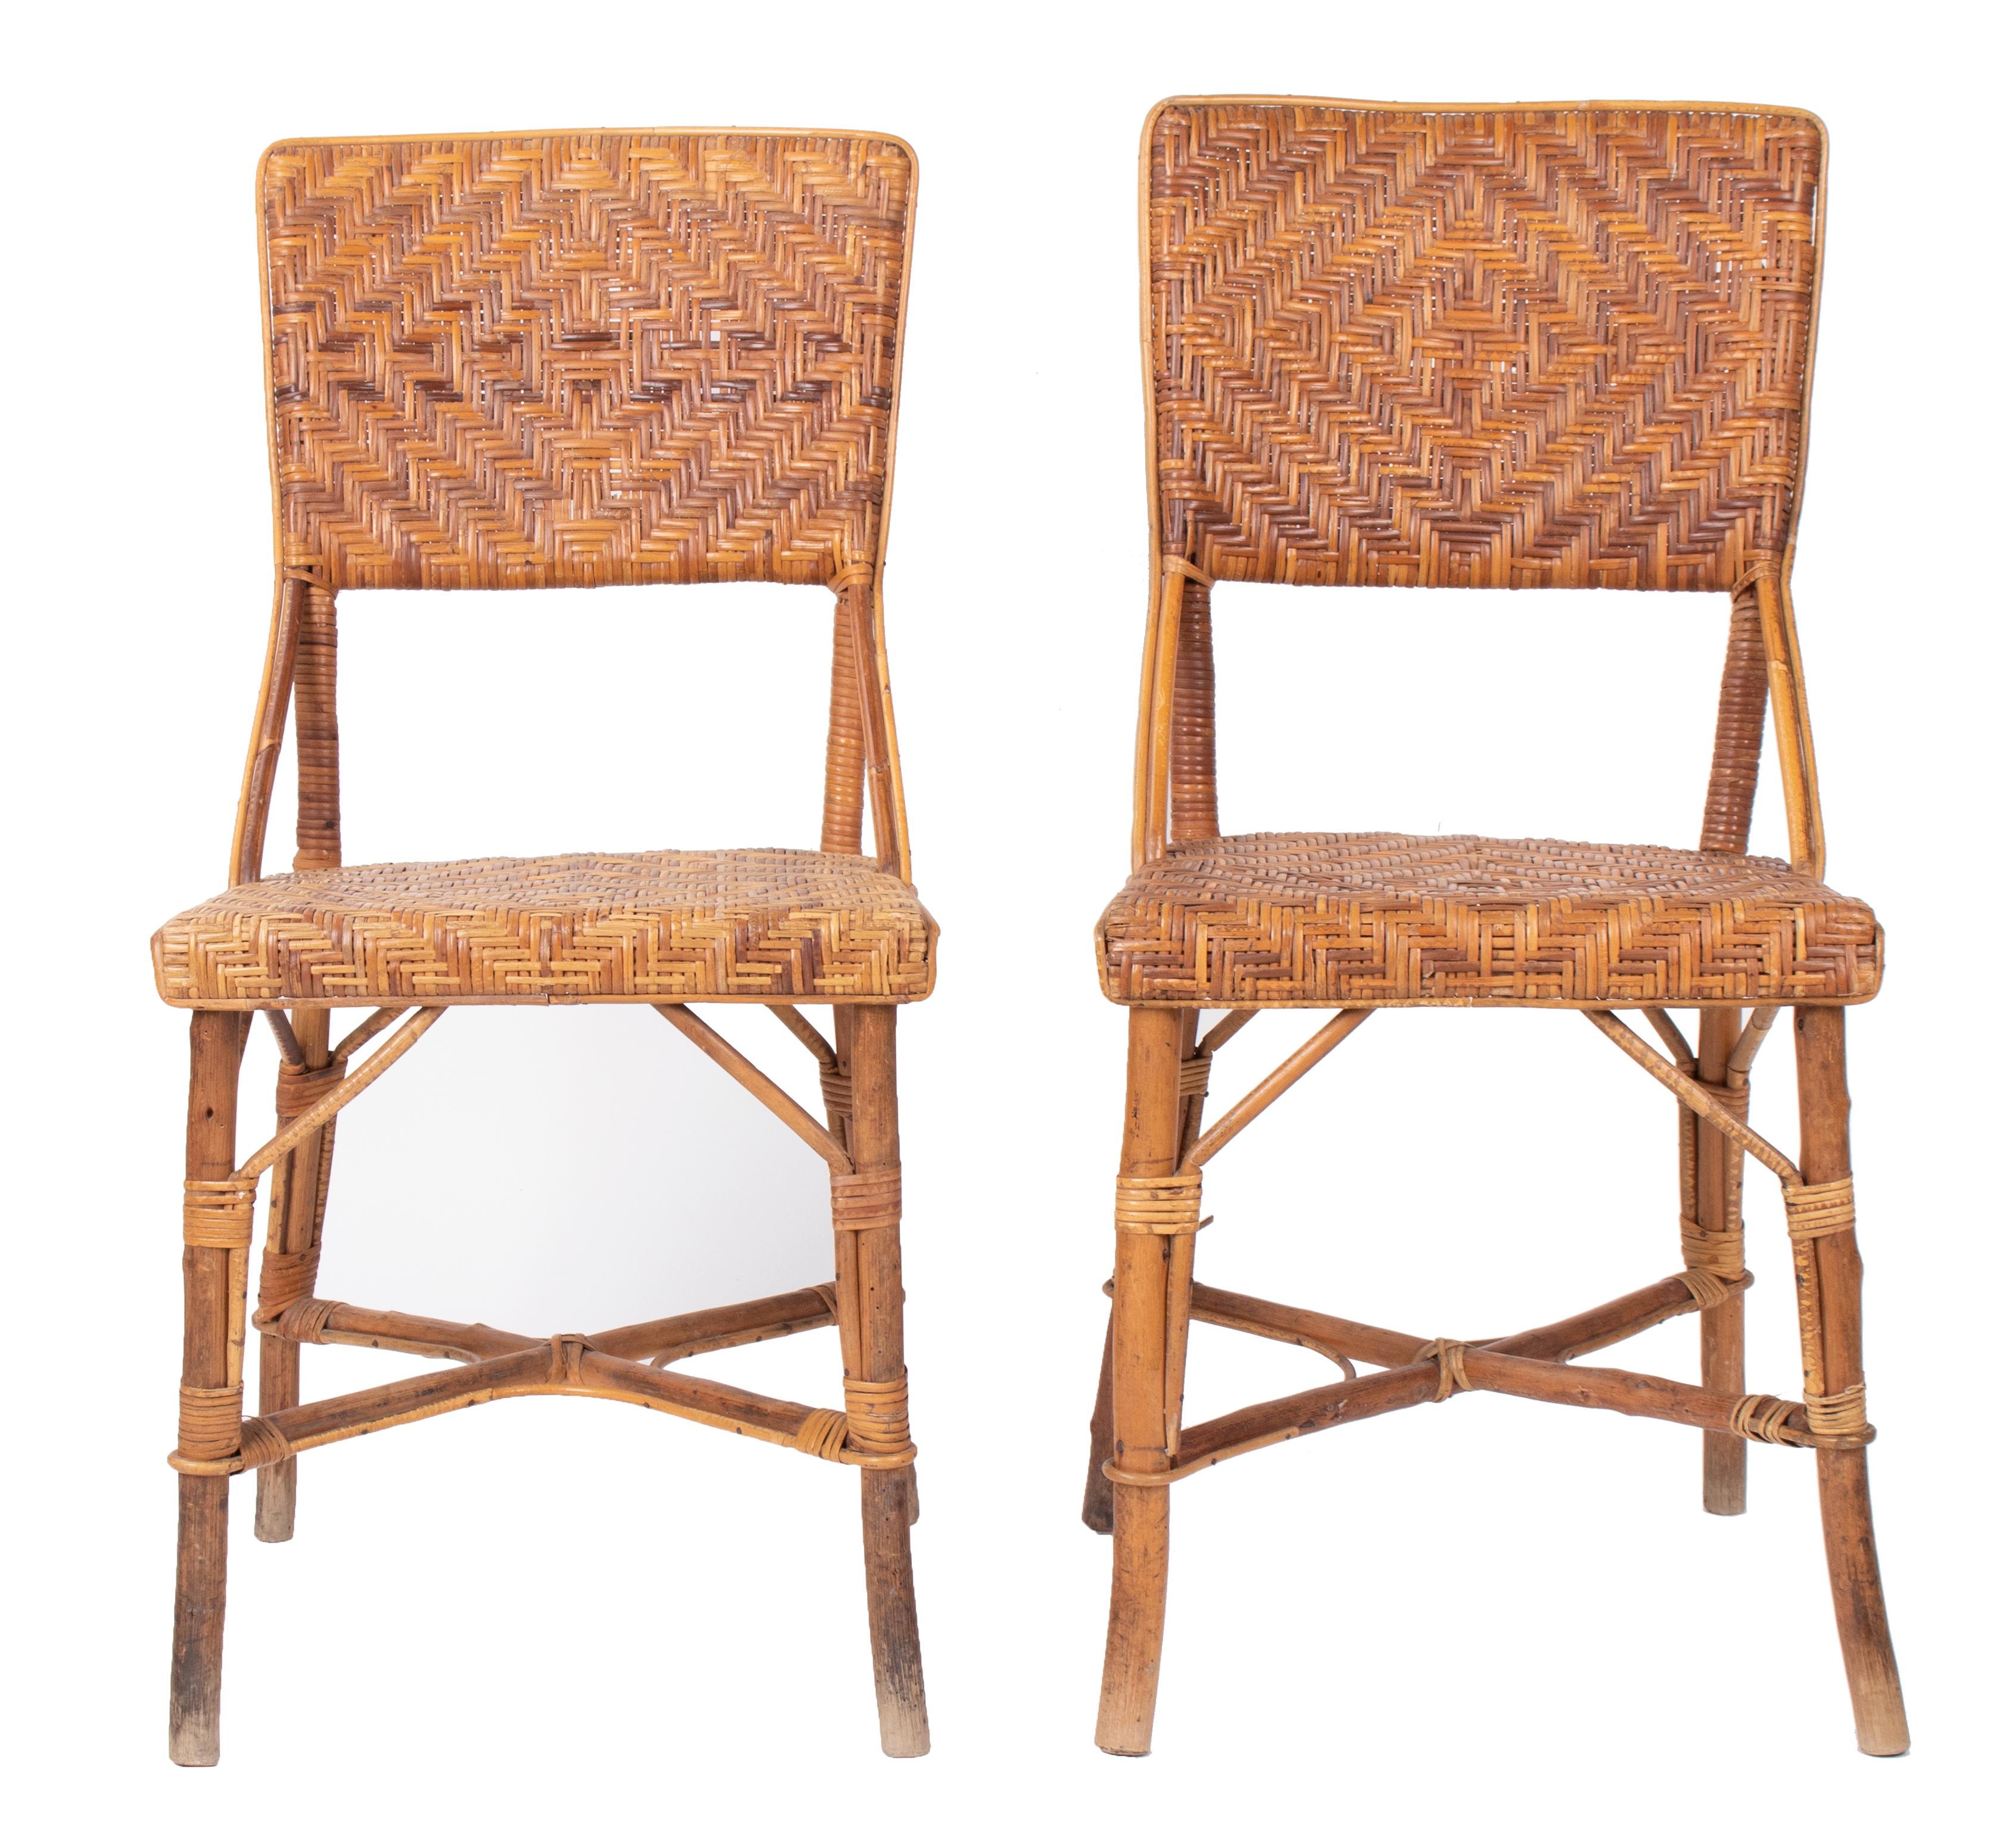 1970s pair of Spanish bamboo and wood chairs.